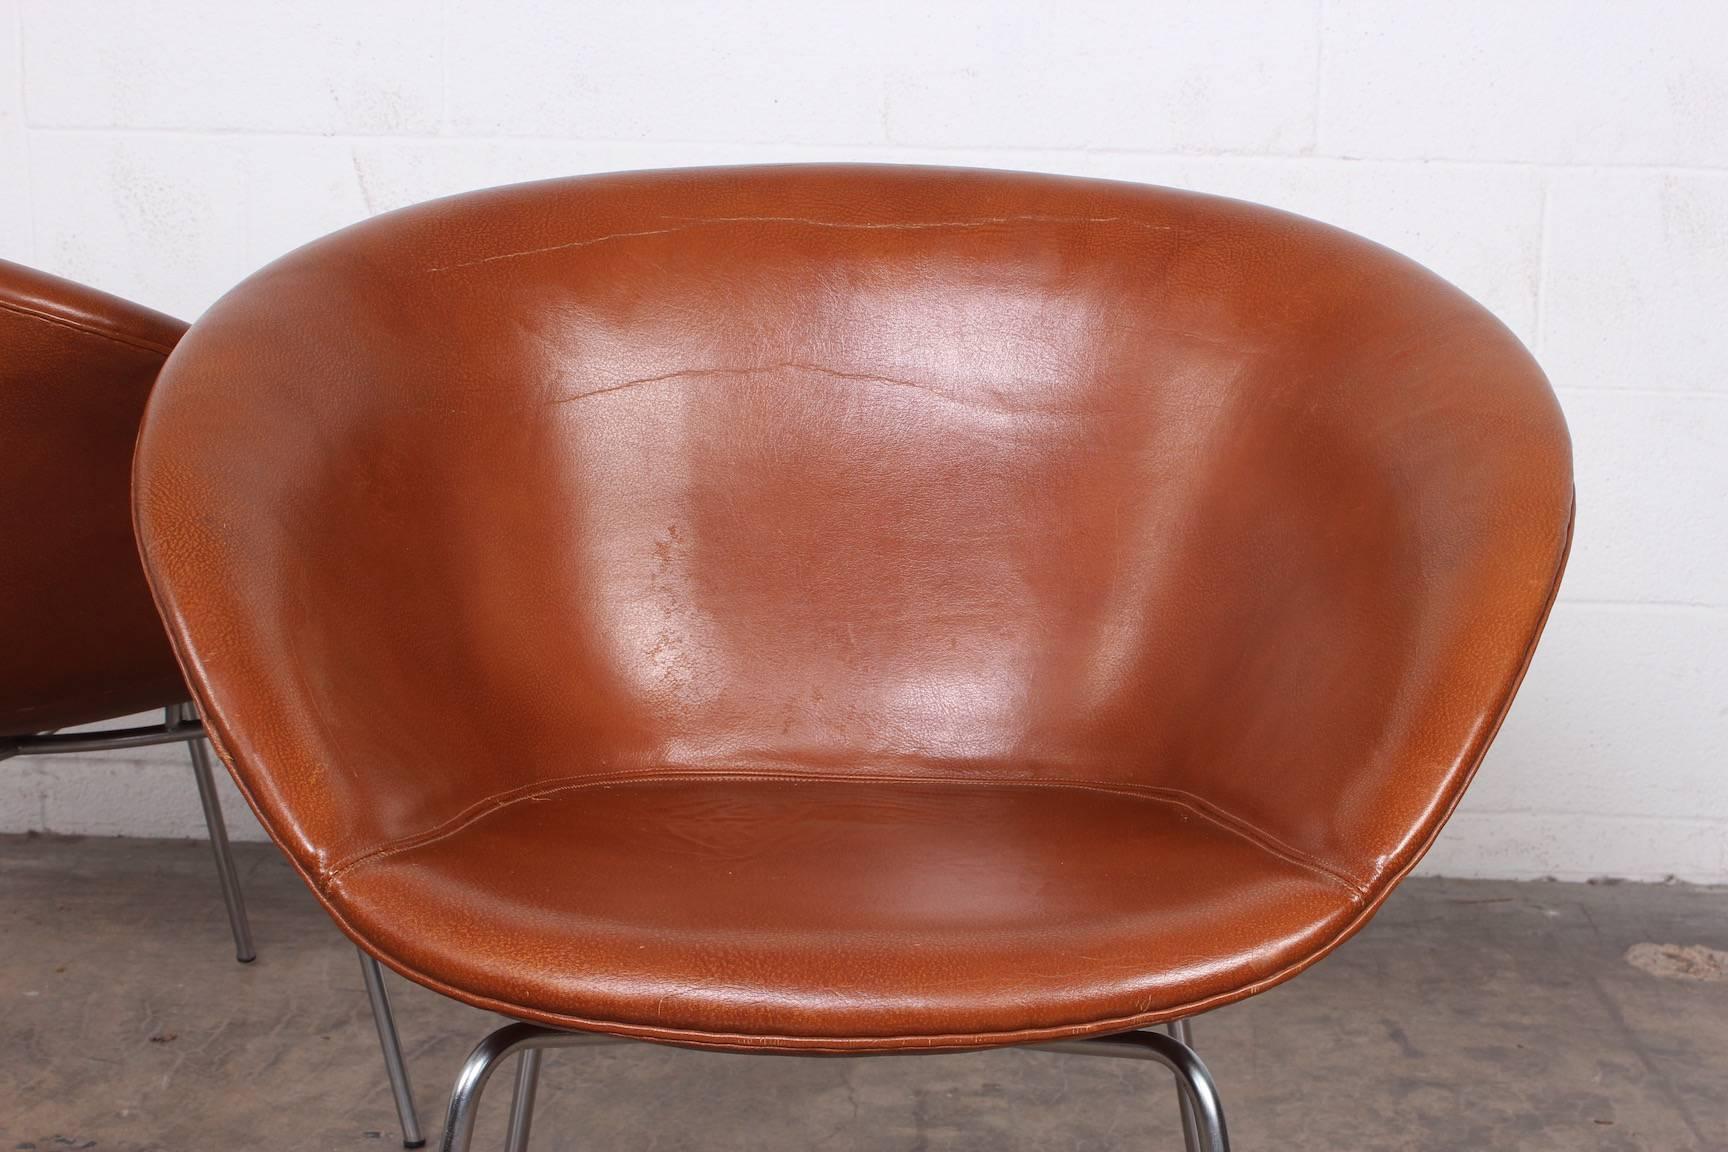 Arne Jacobsen Pot Chairs in Original Leather 6